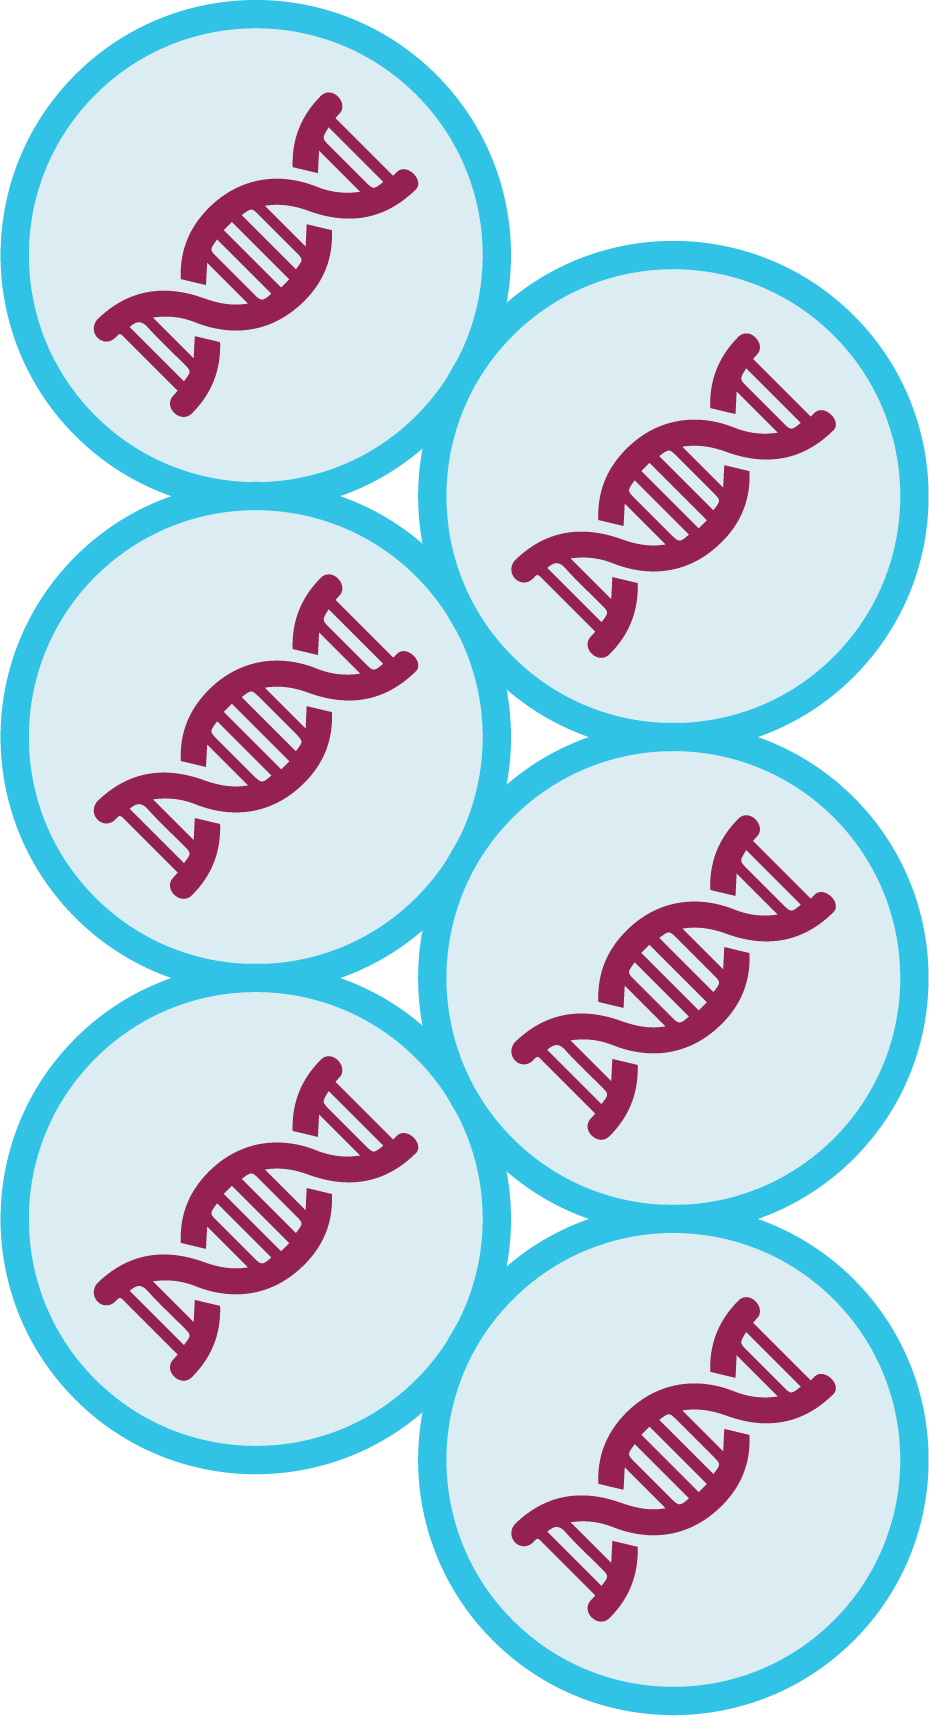 What is gene therapy?